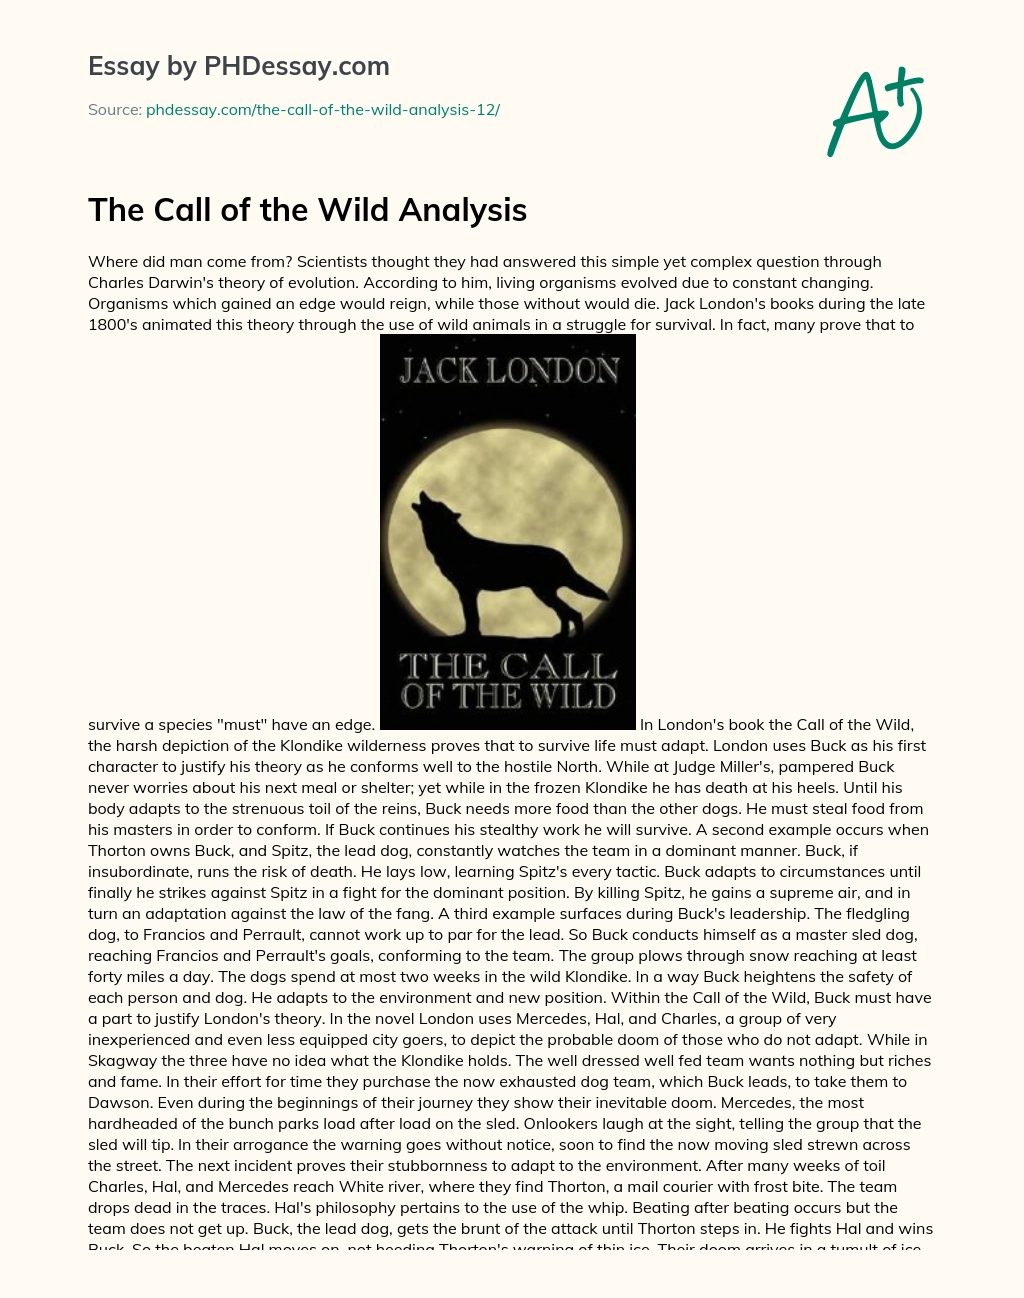 The Call of the Wild Analysis essay